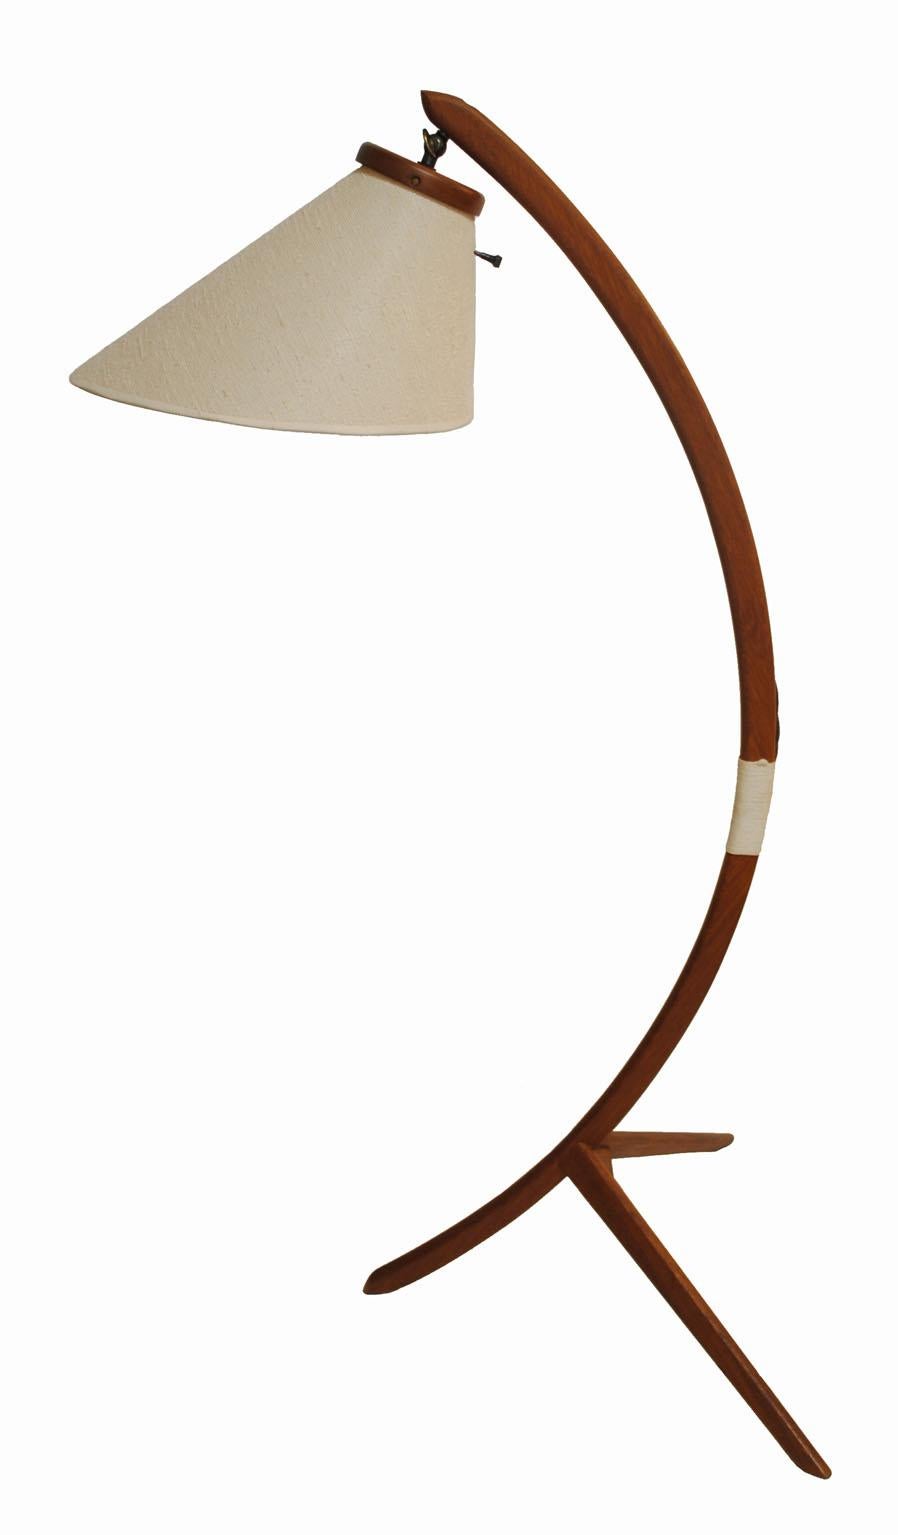 A stunning teak floor arc lamp from the 1960s Danish modern era. Commonly referred to as a 